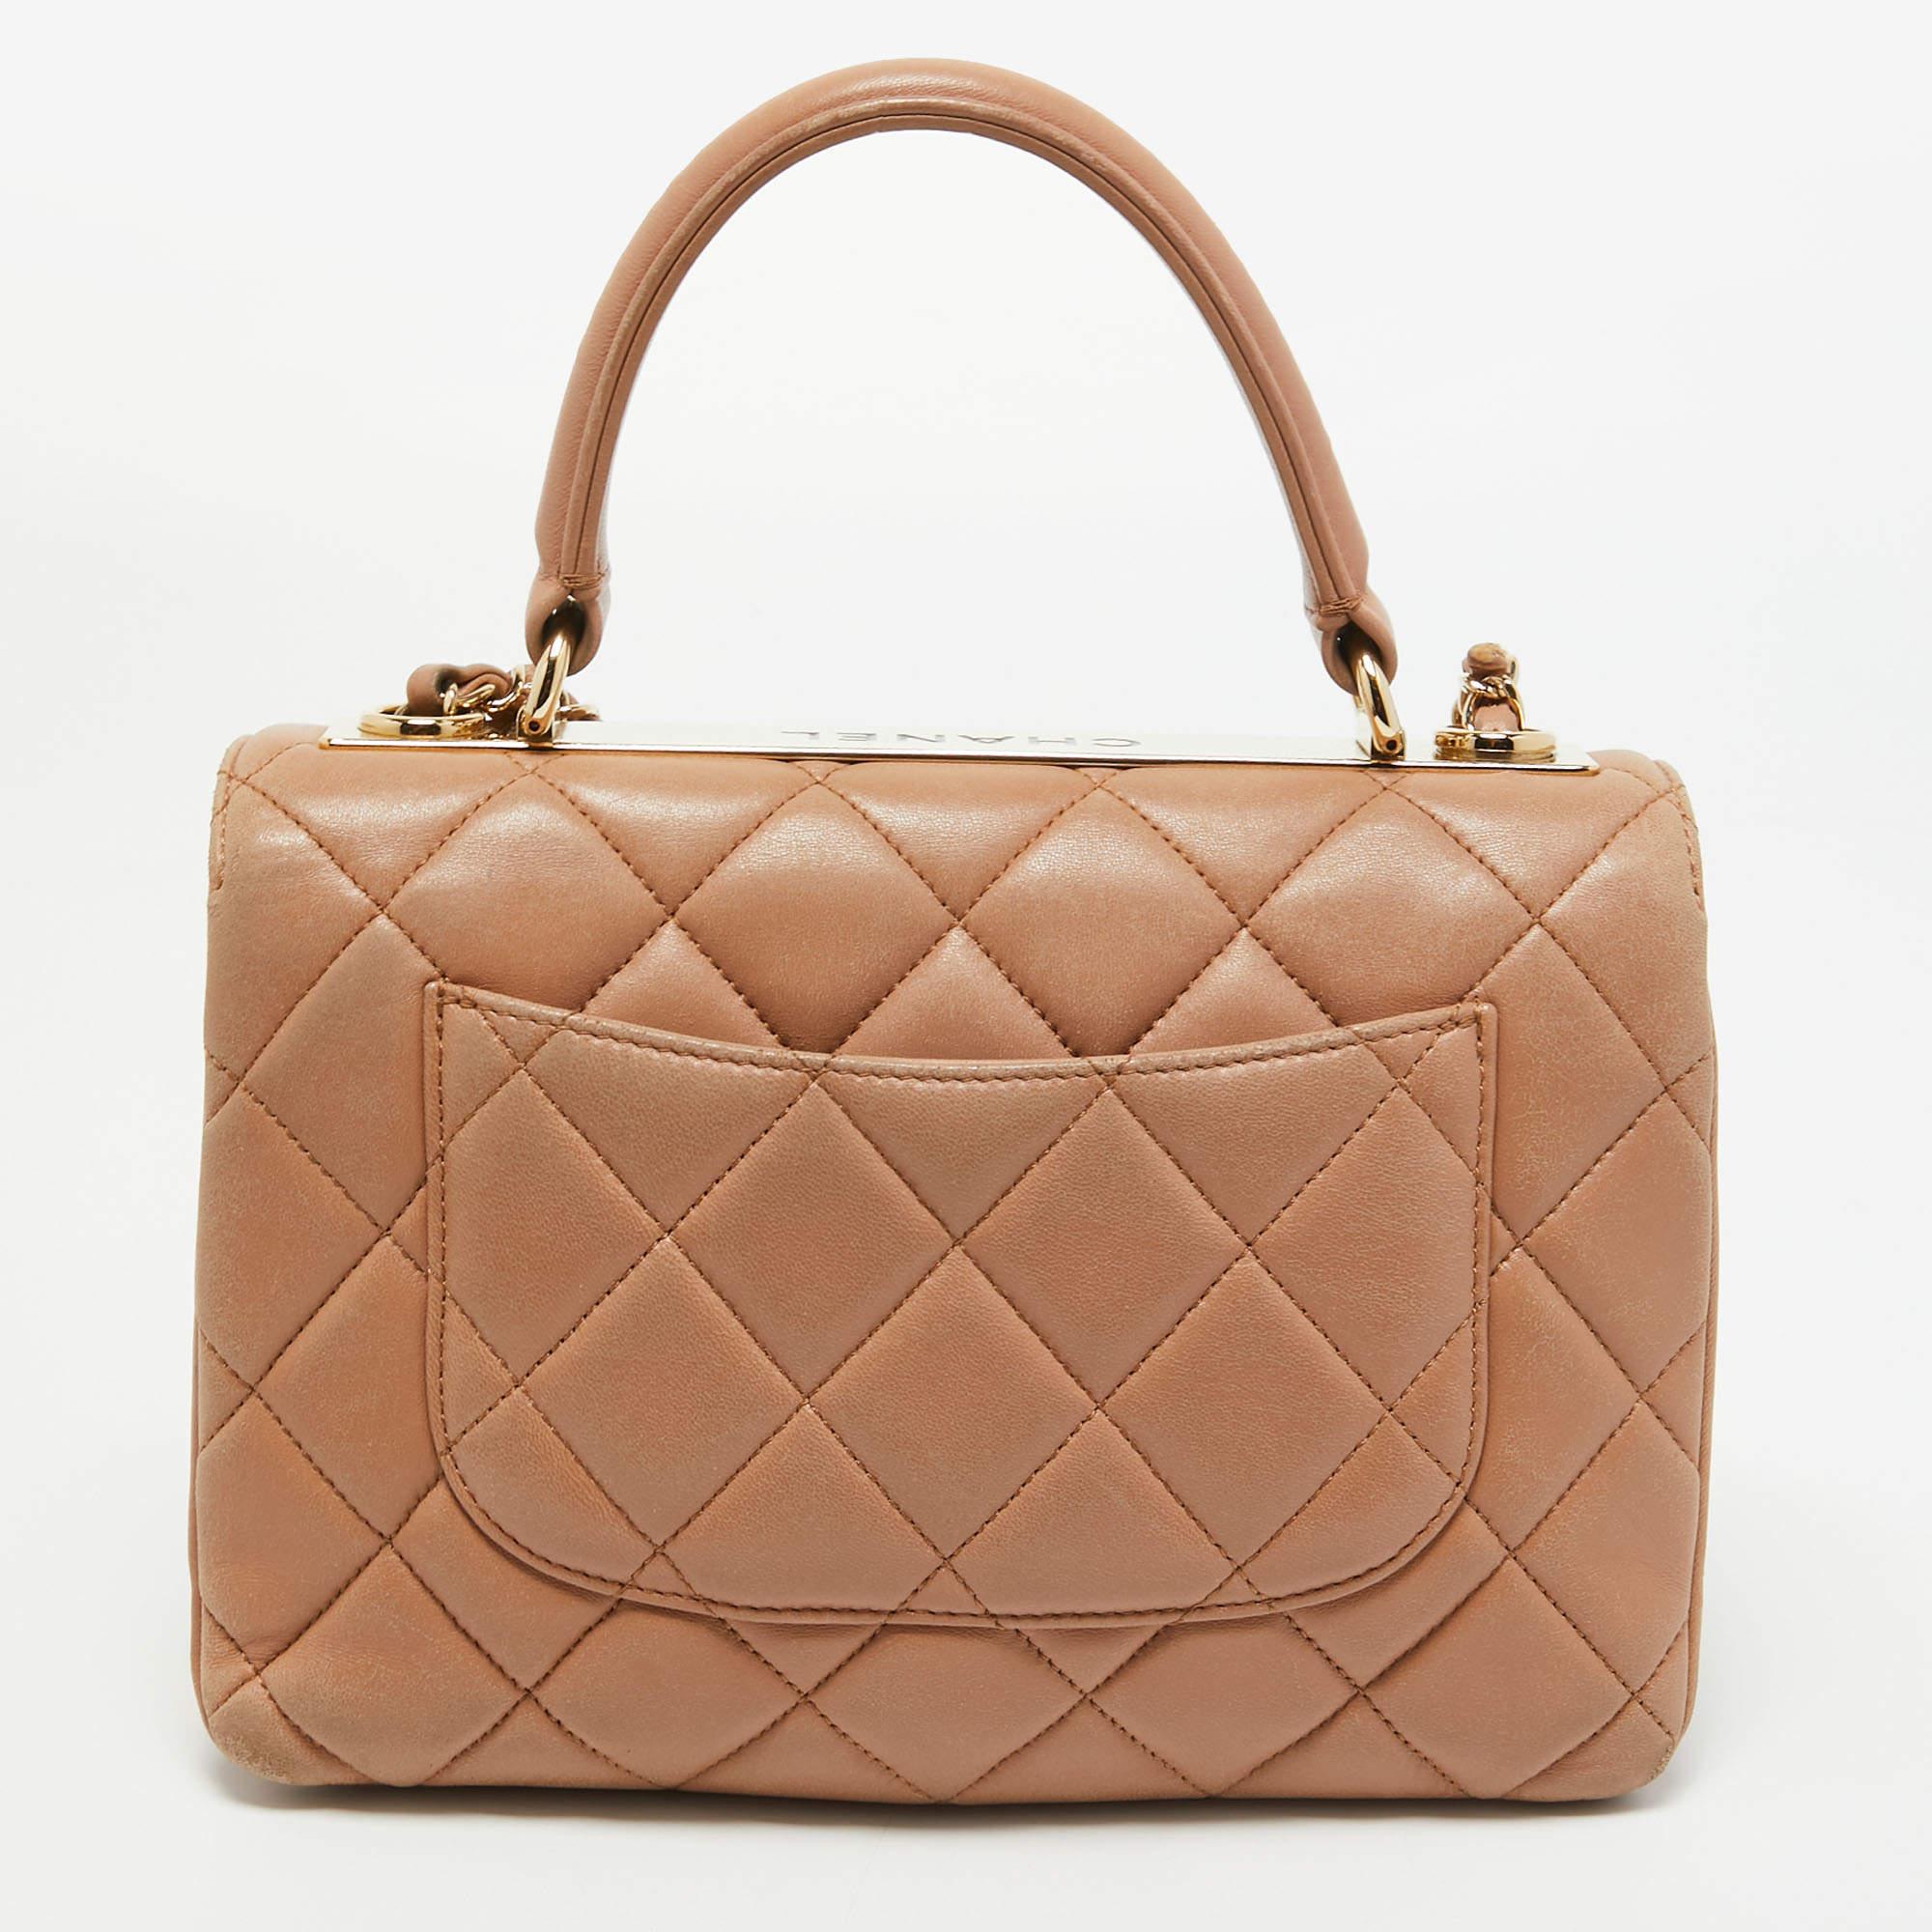 Chanel Beige Quilted Leather Small Trendy CC Flap Top Handle Bag In Fair Condition For Sale In Dubai, Al Qouz 2